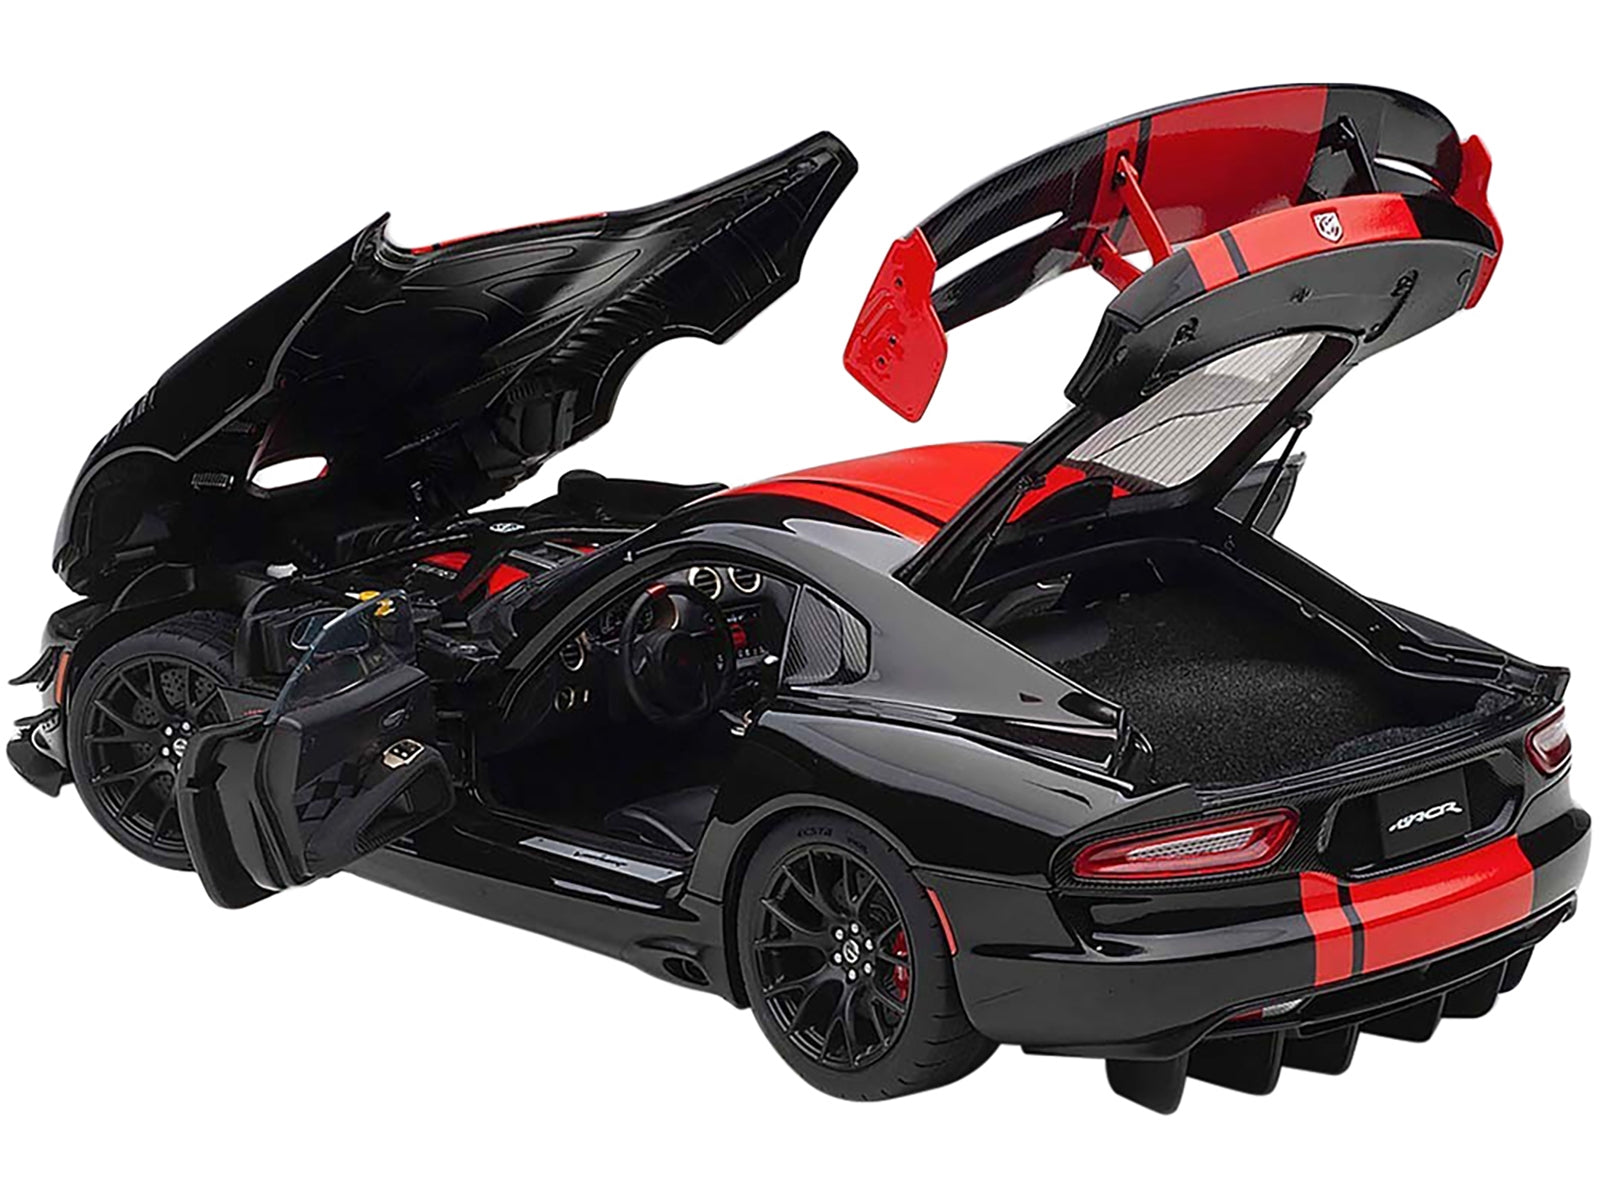 2017 Dodge Viper 1:28 Edition ACR Black with Red Stripes 1/18 Model Car by Autoart